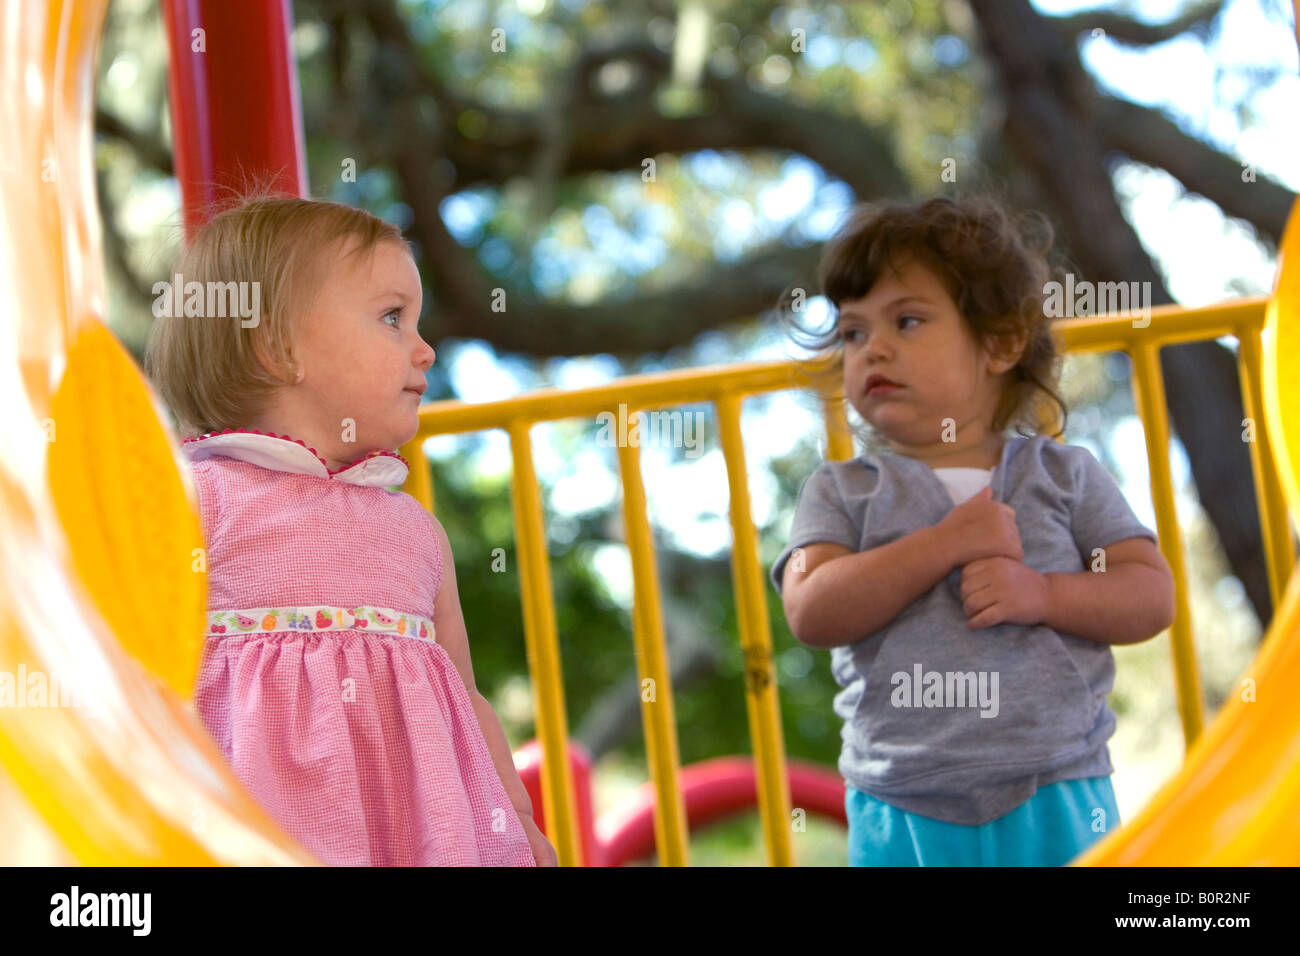 Young girls on playground equipment in Tampa Florida Stock Photo